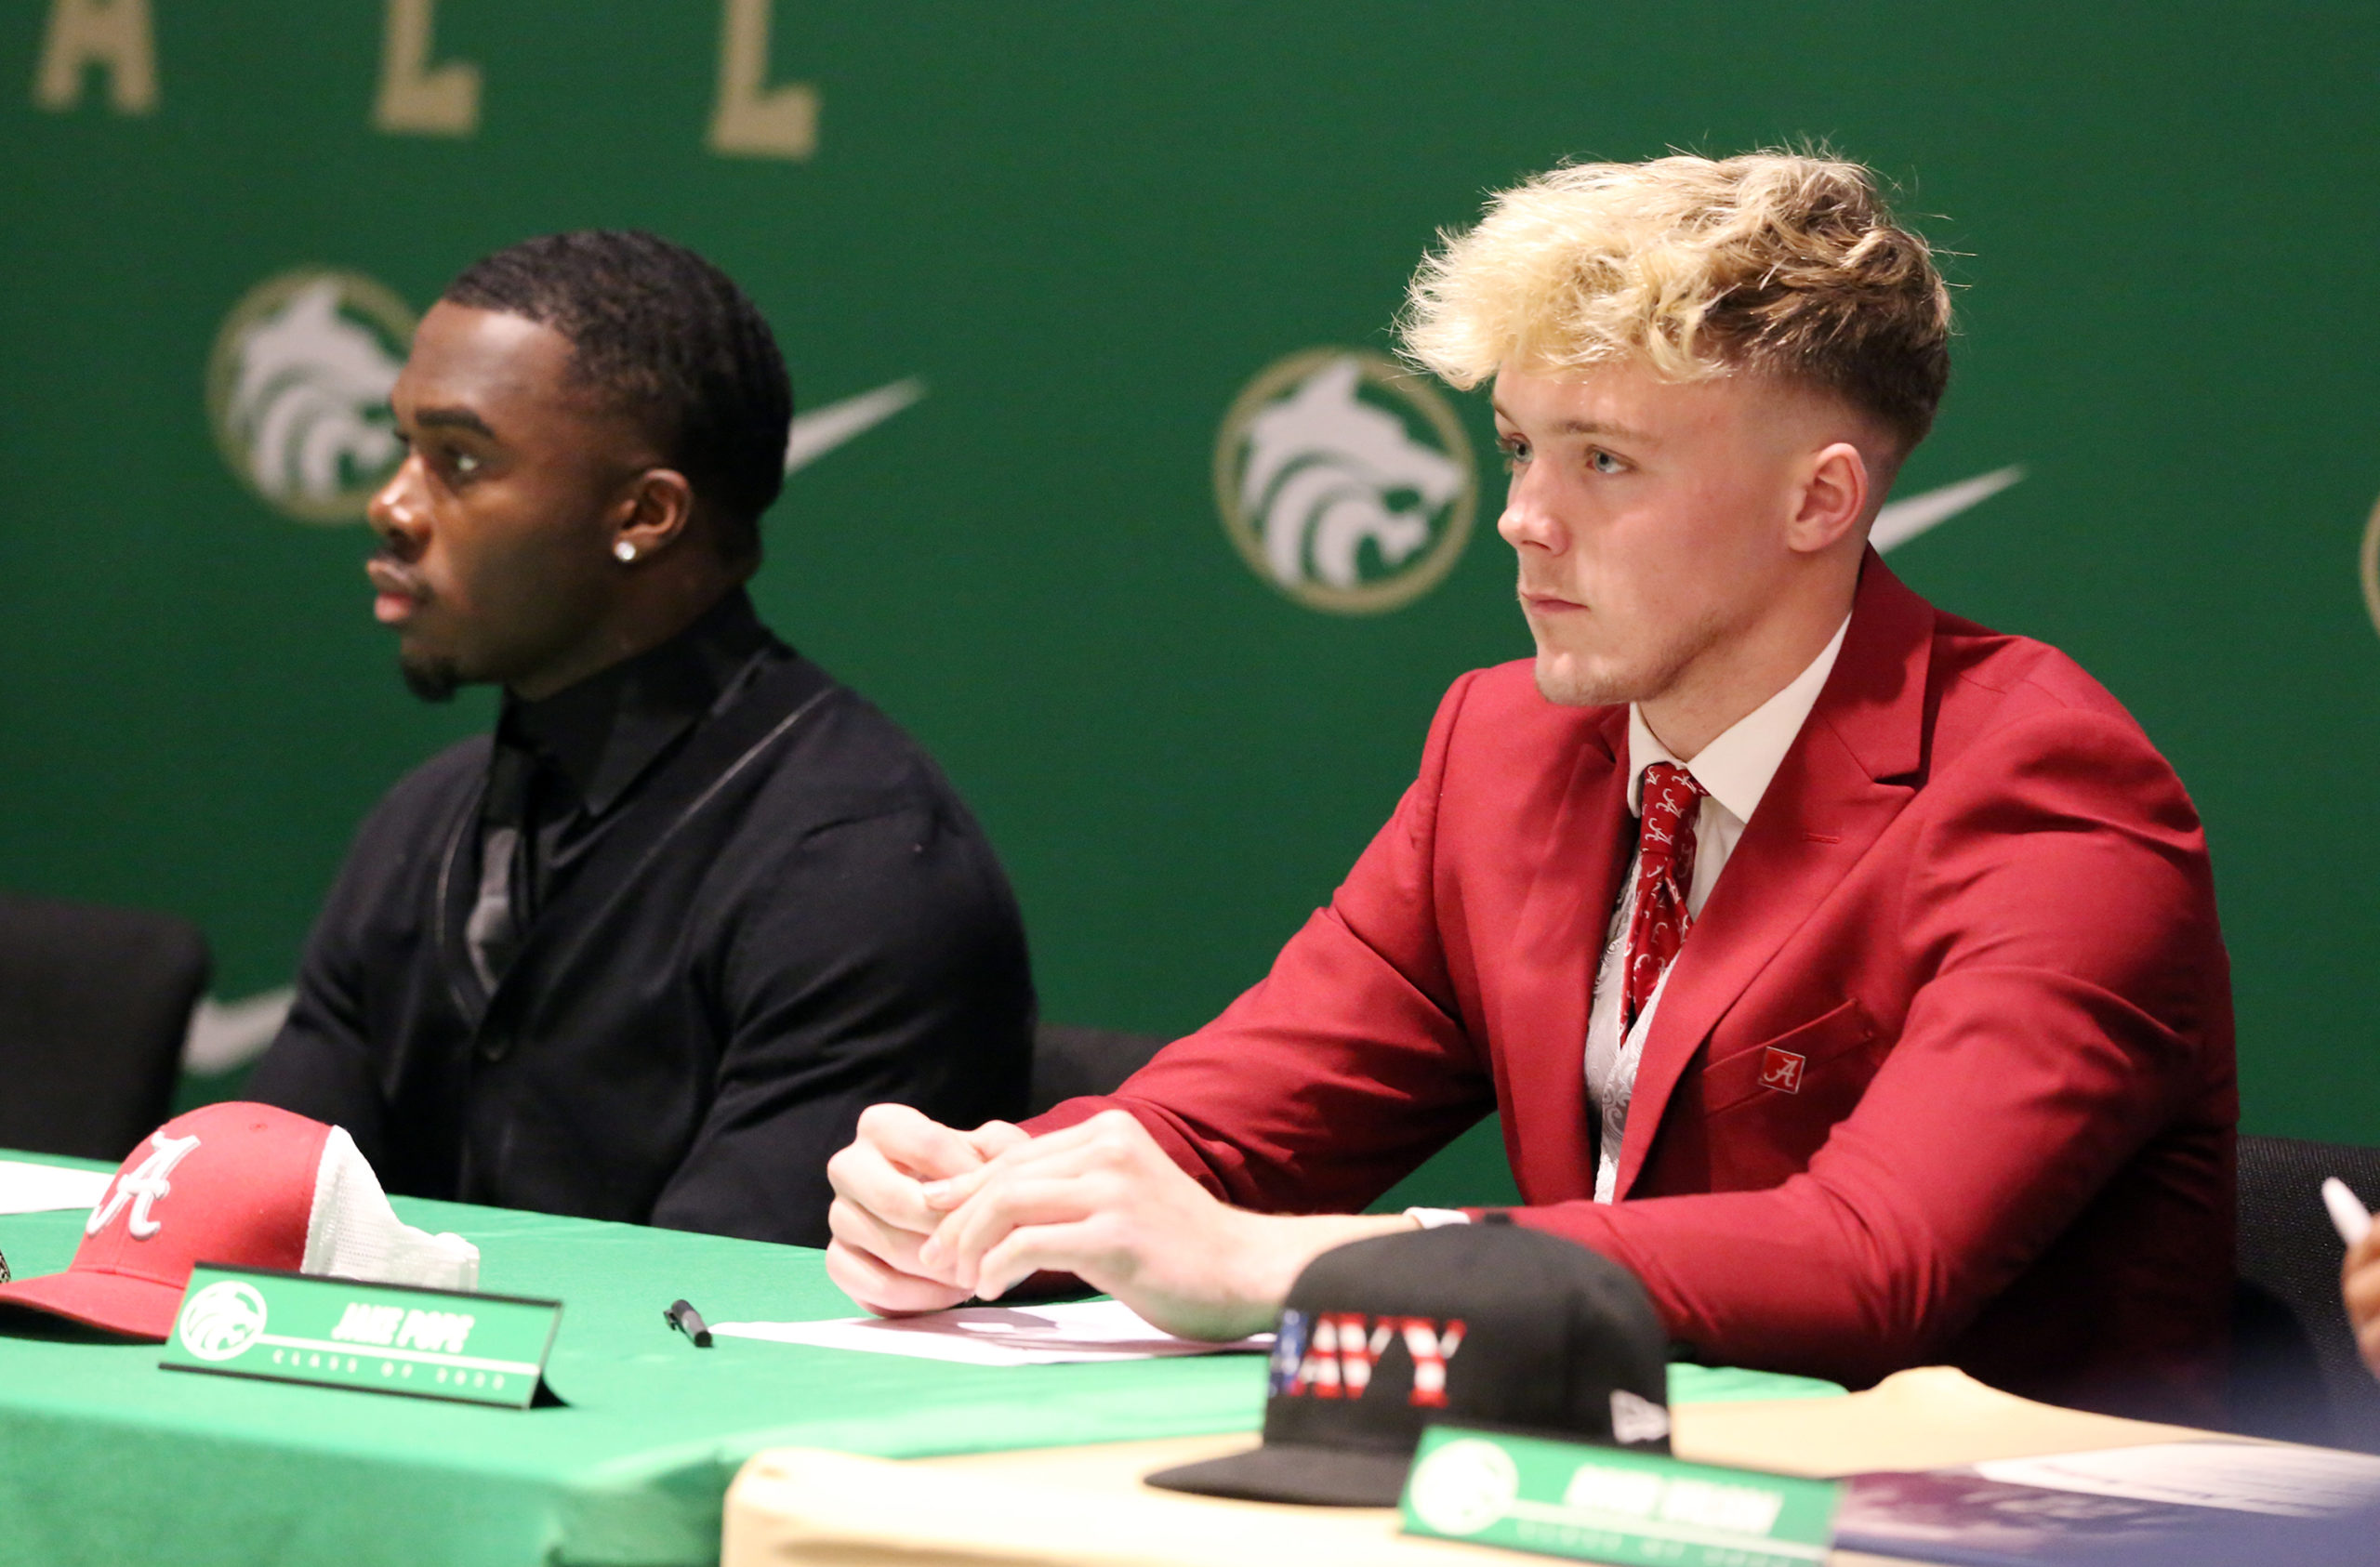 Scenes from National Signing Day at Buford High School. (Photo: David McGregor)